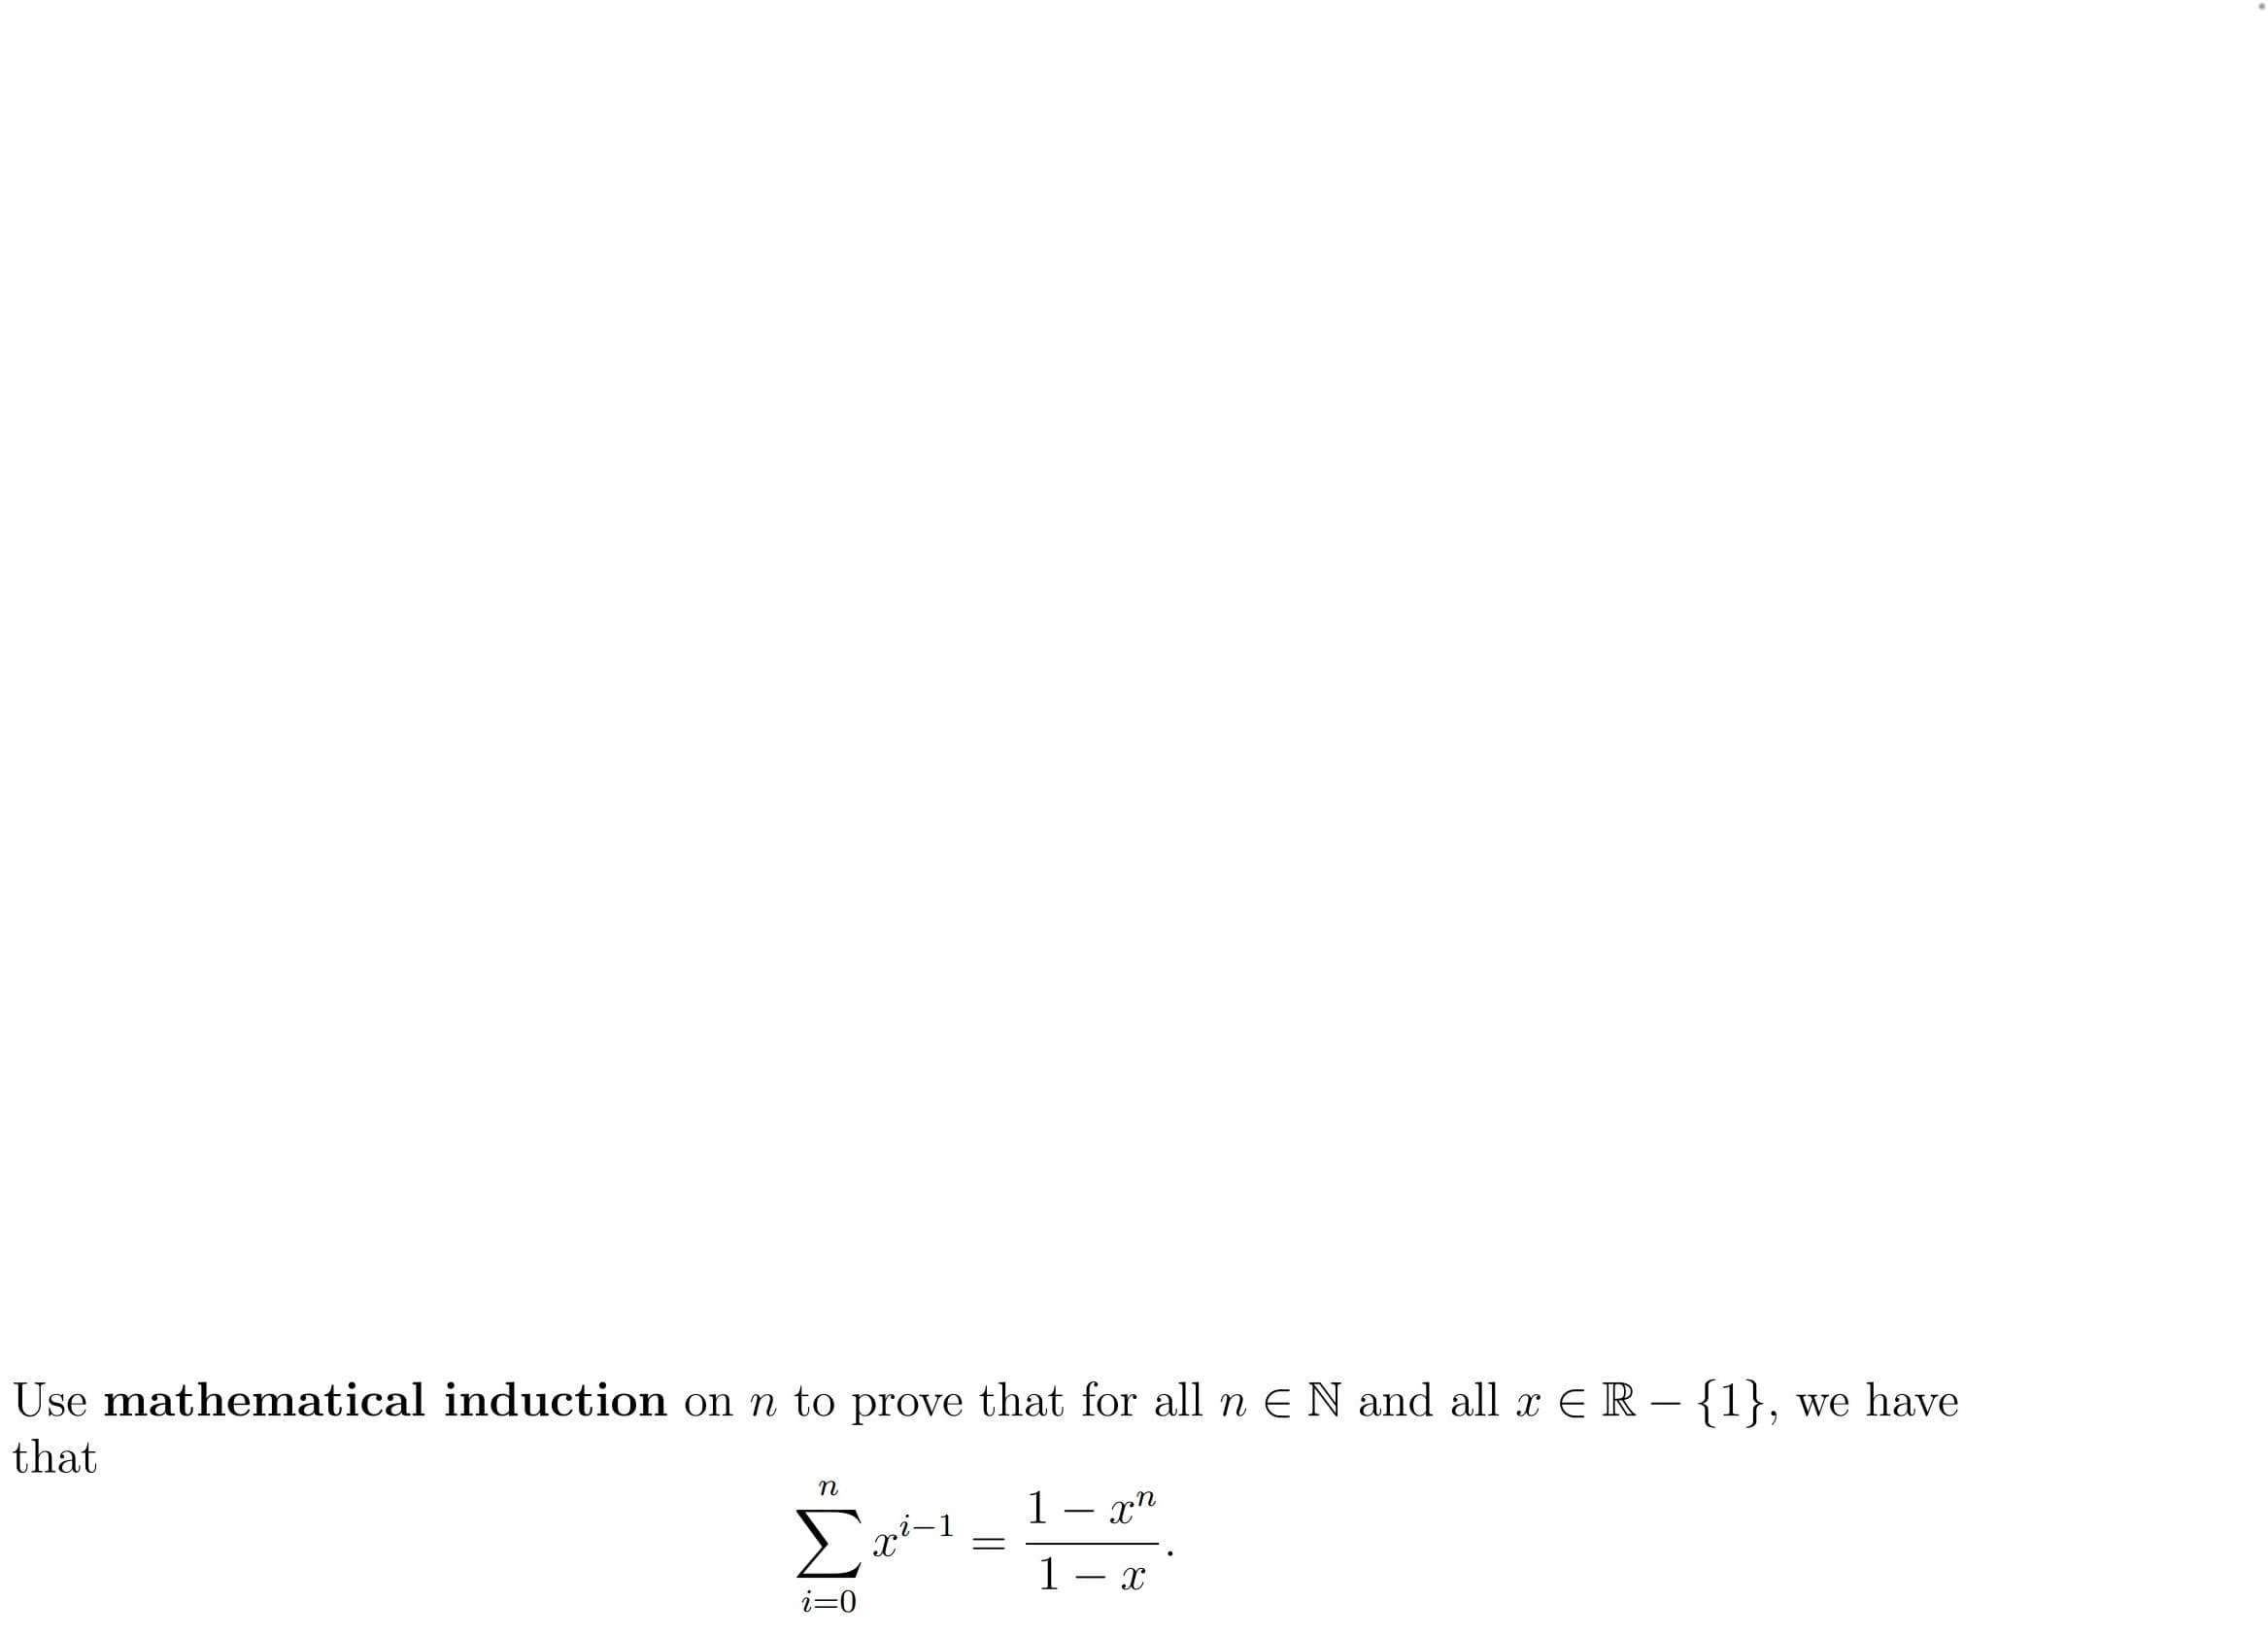 Use mathematical induction on n to prove that for all n E N and all x E R – {1}, we have
that
n
1- x"
Σ
1 – x
i=0
